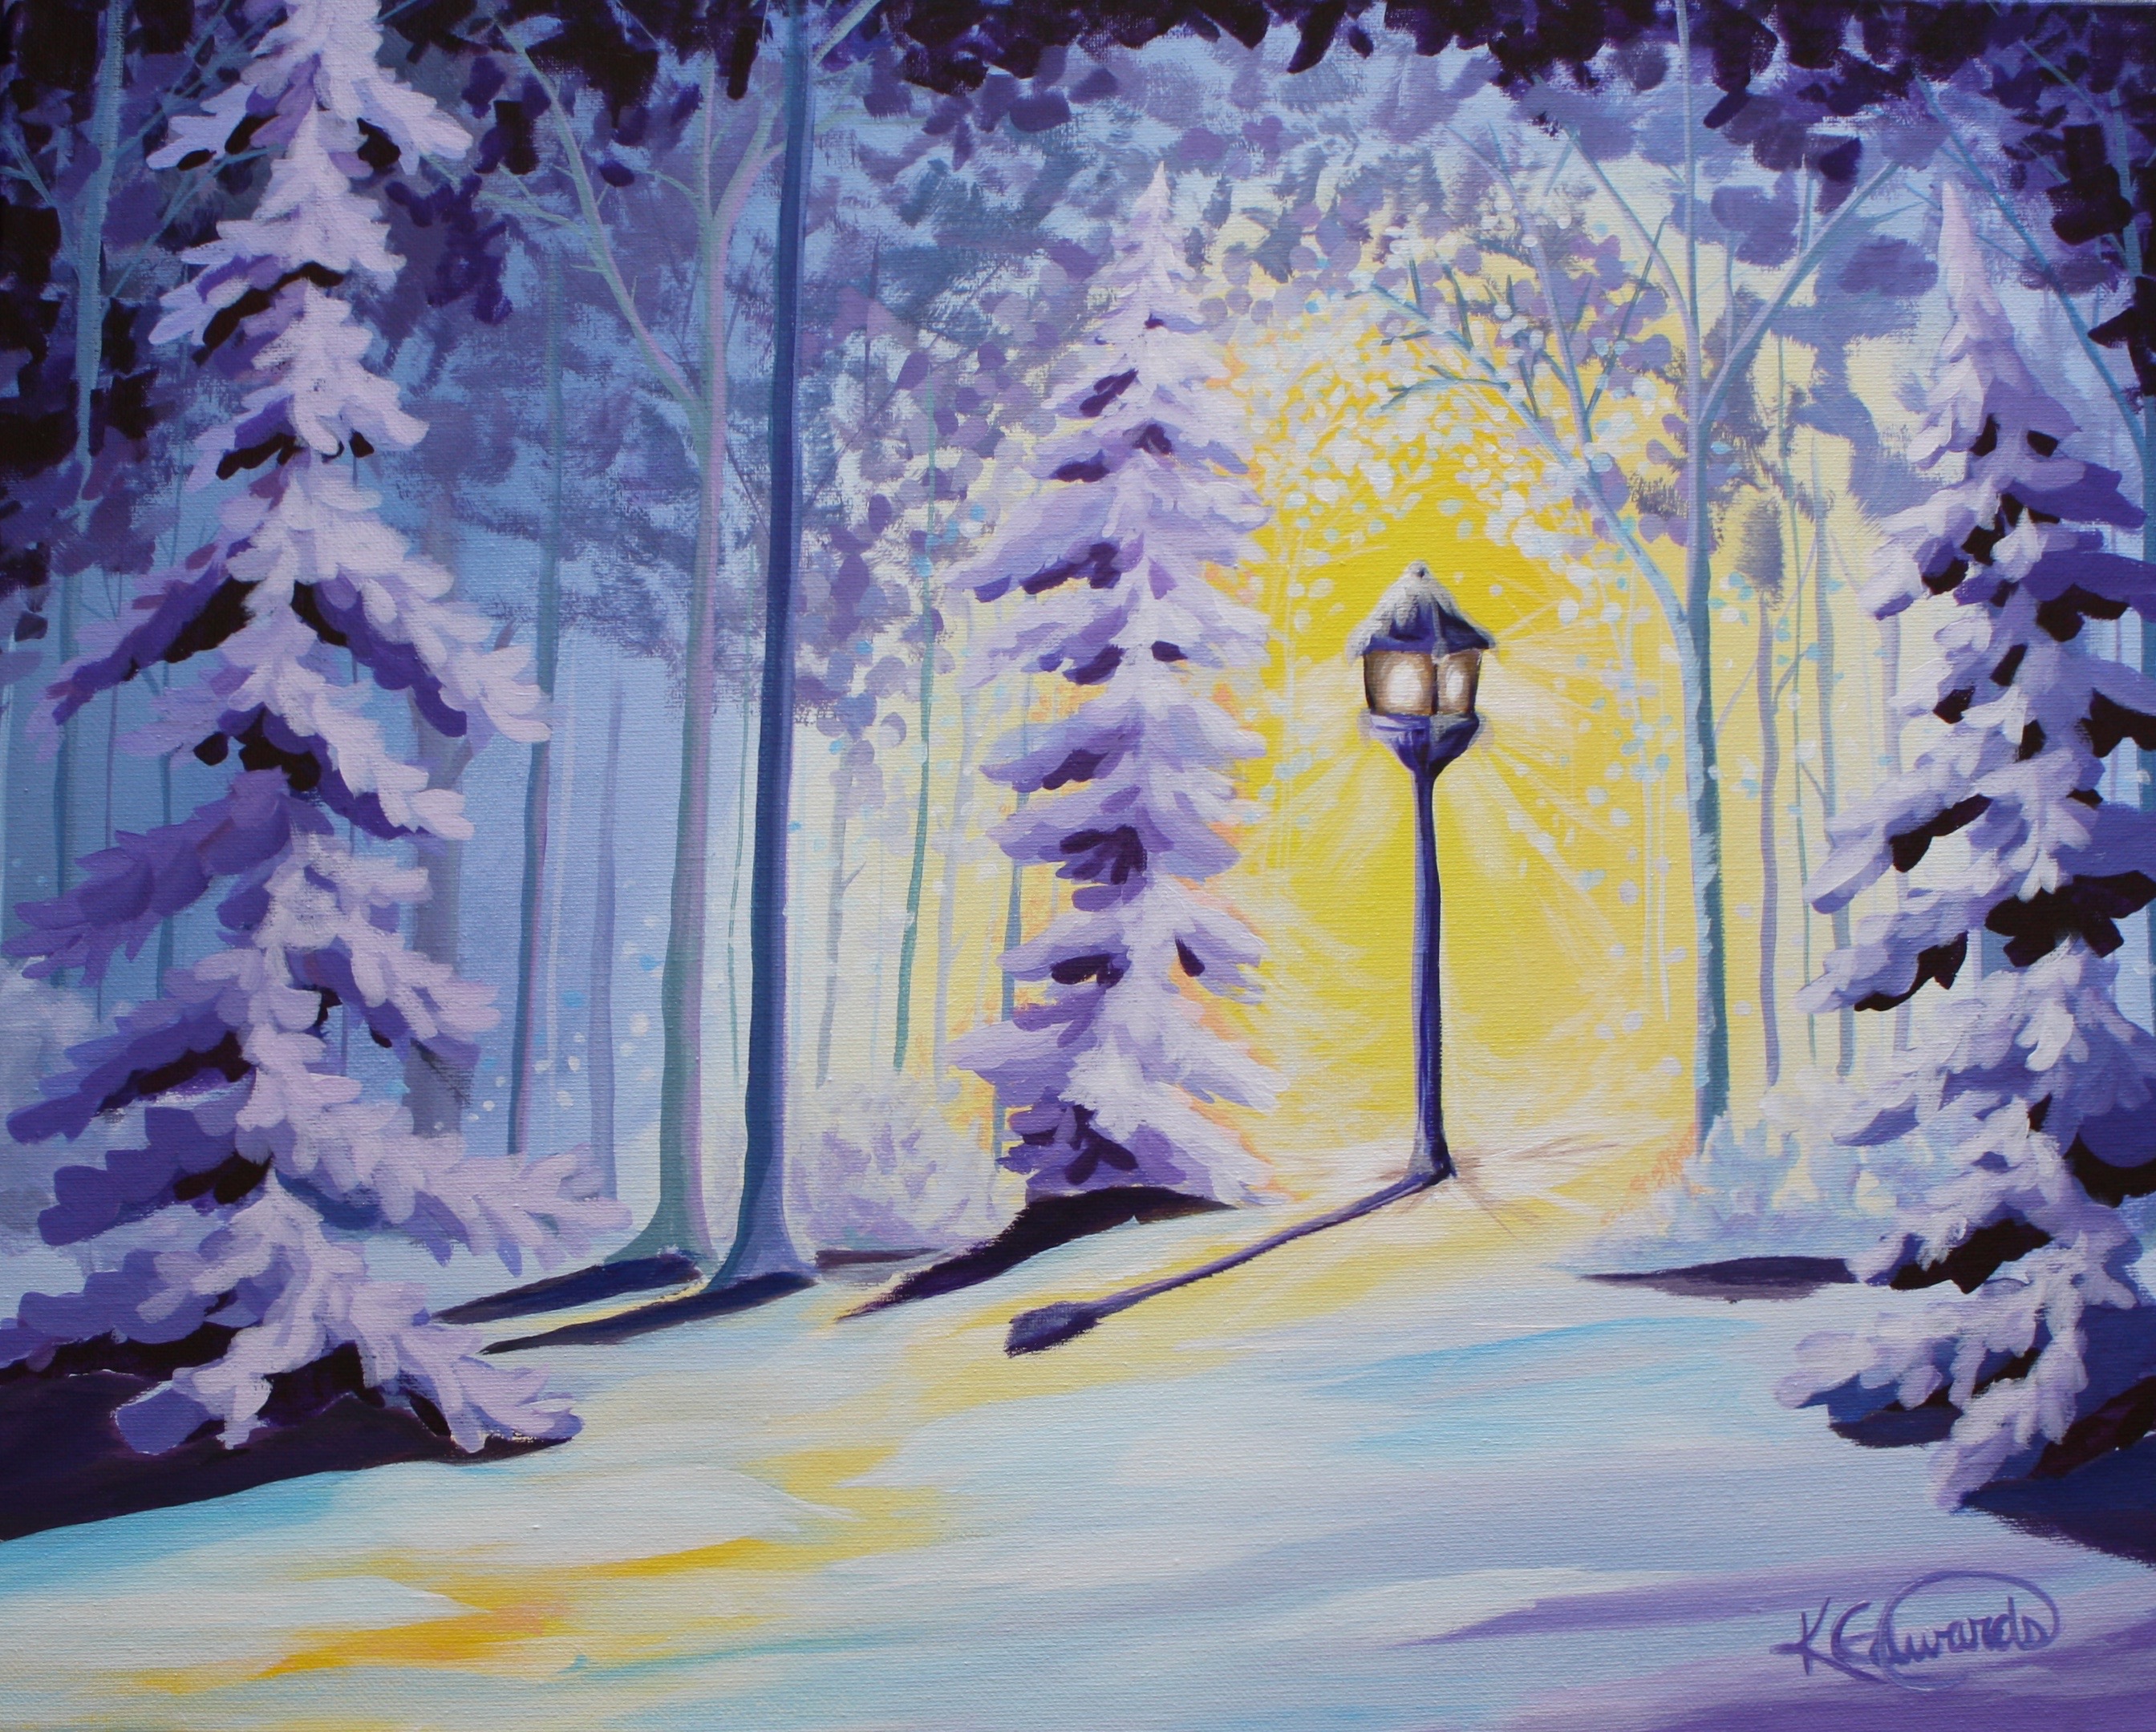 Karin Edwards, Winter Landscape Painting "The Lamp Post"